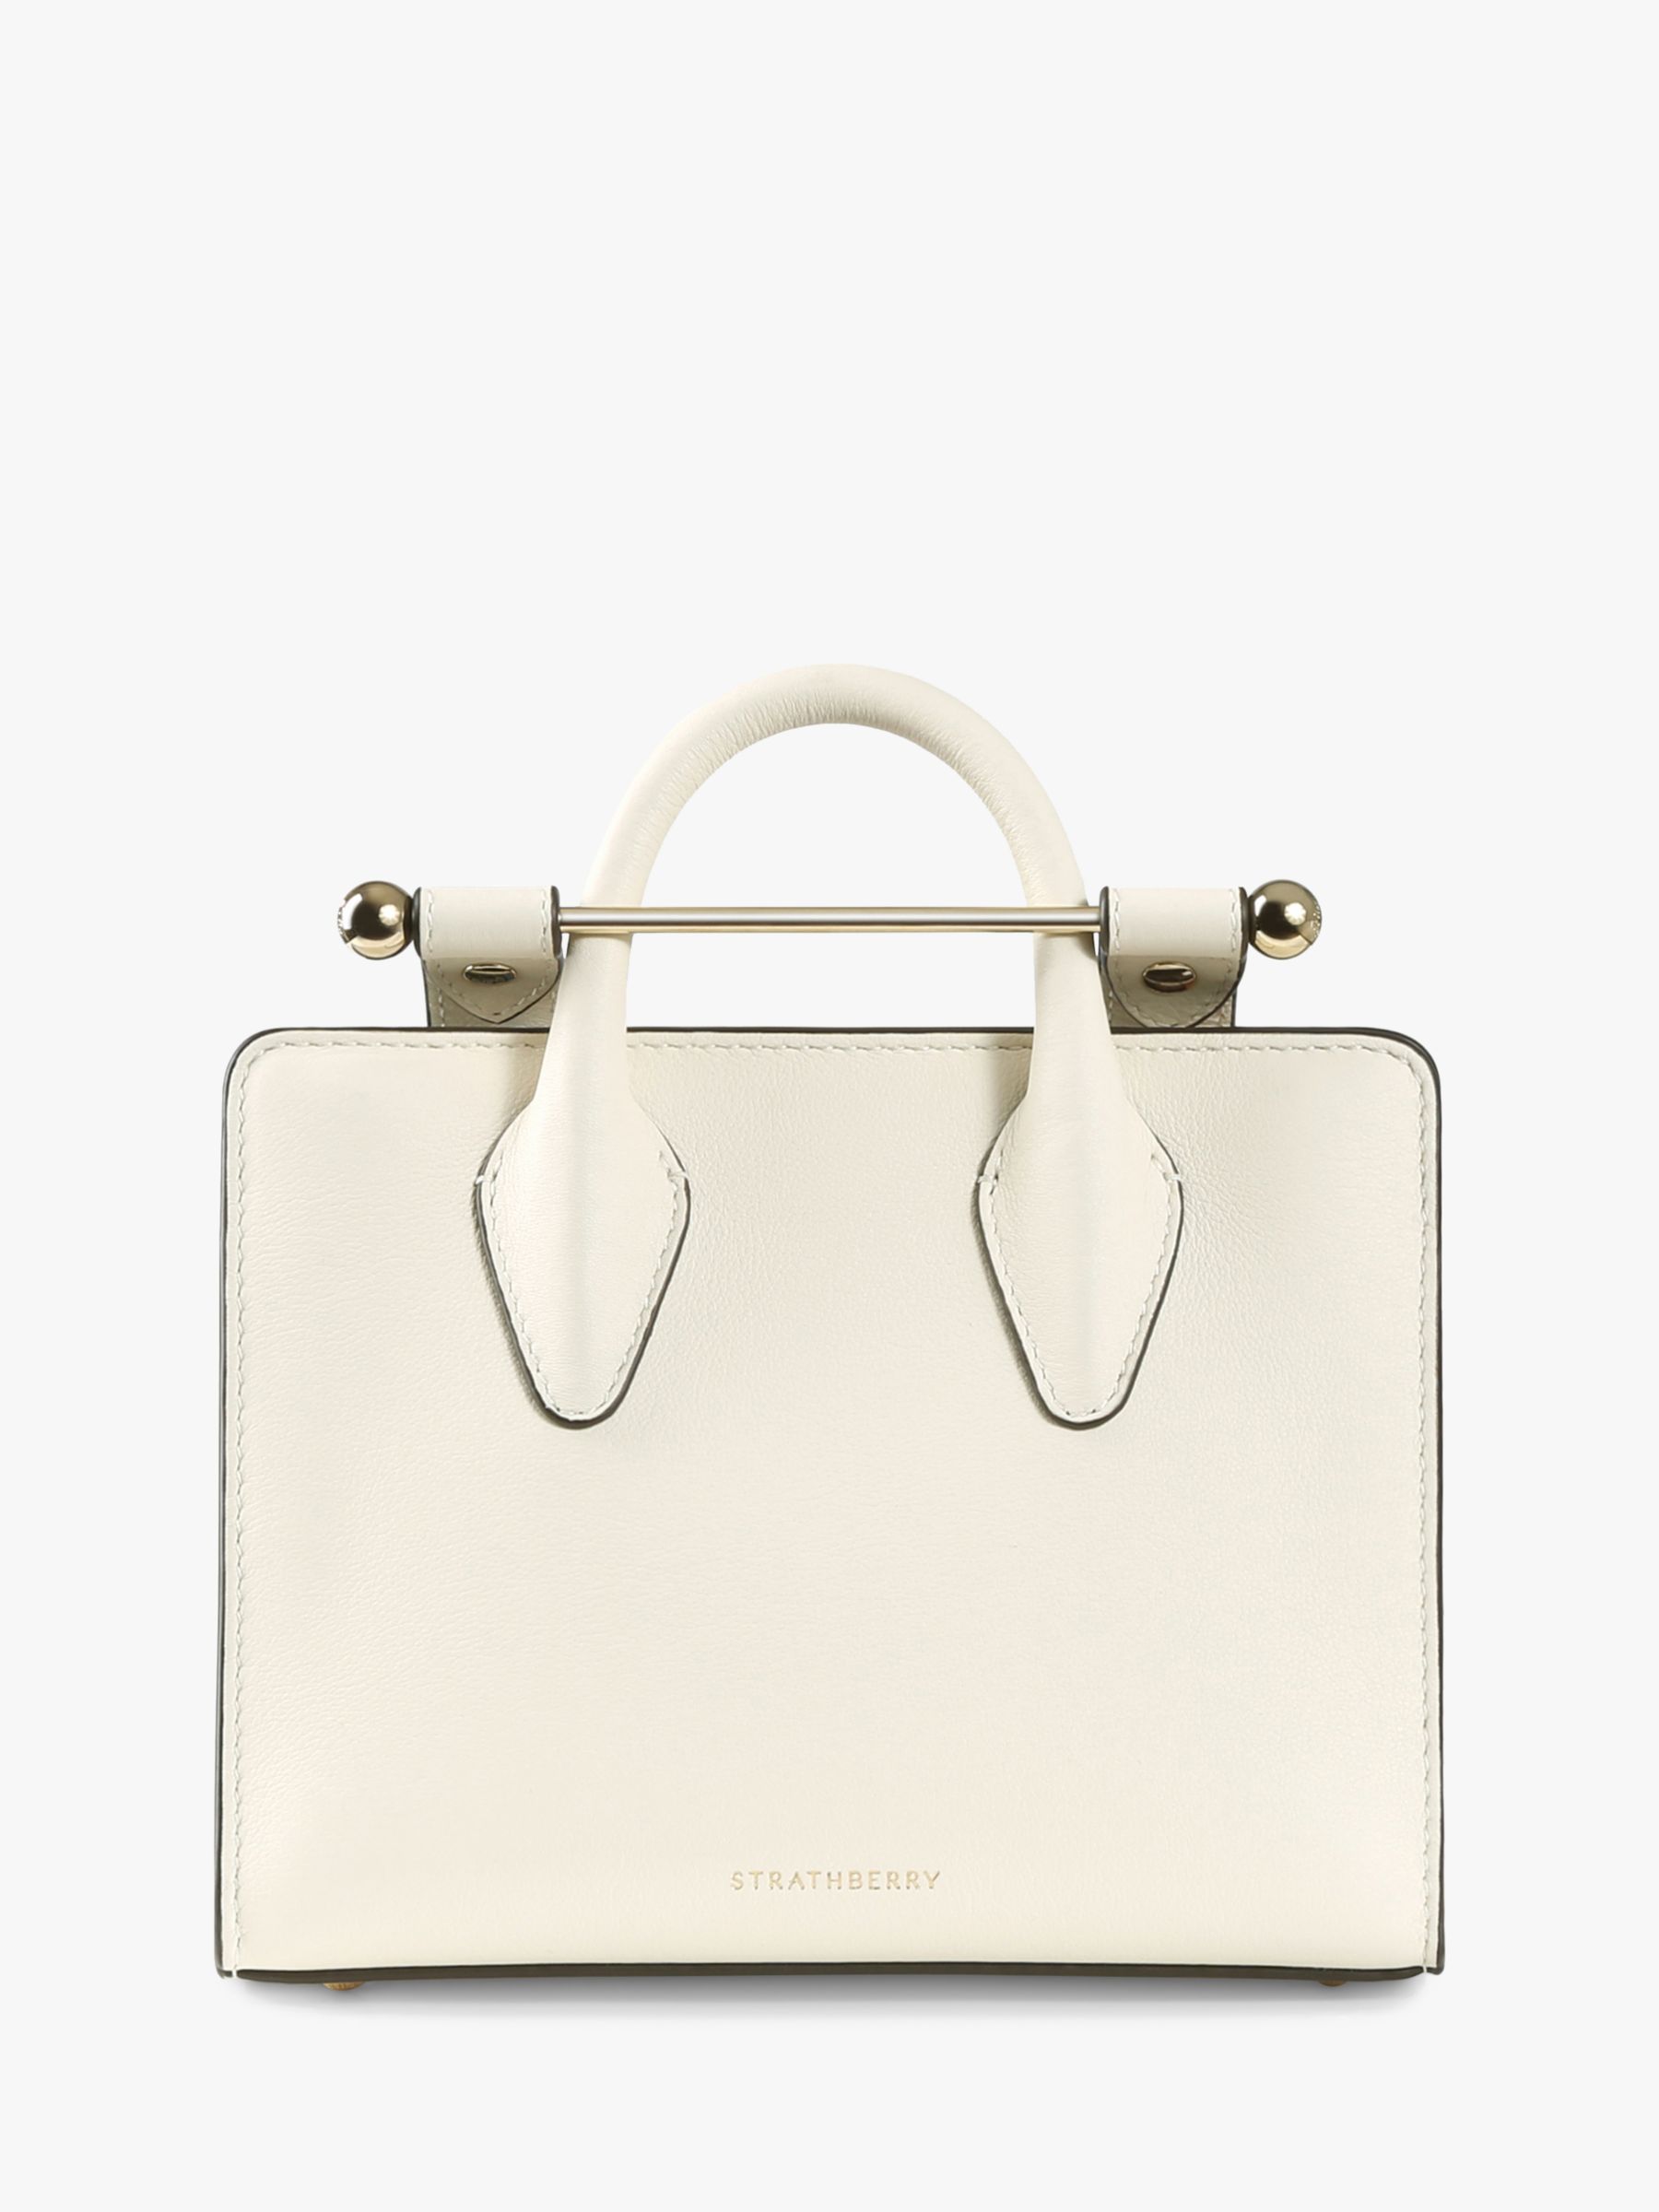 Strathberry Nano Leather Tote Bag, Vanilla at John Lewis & Partners